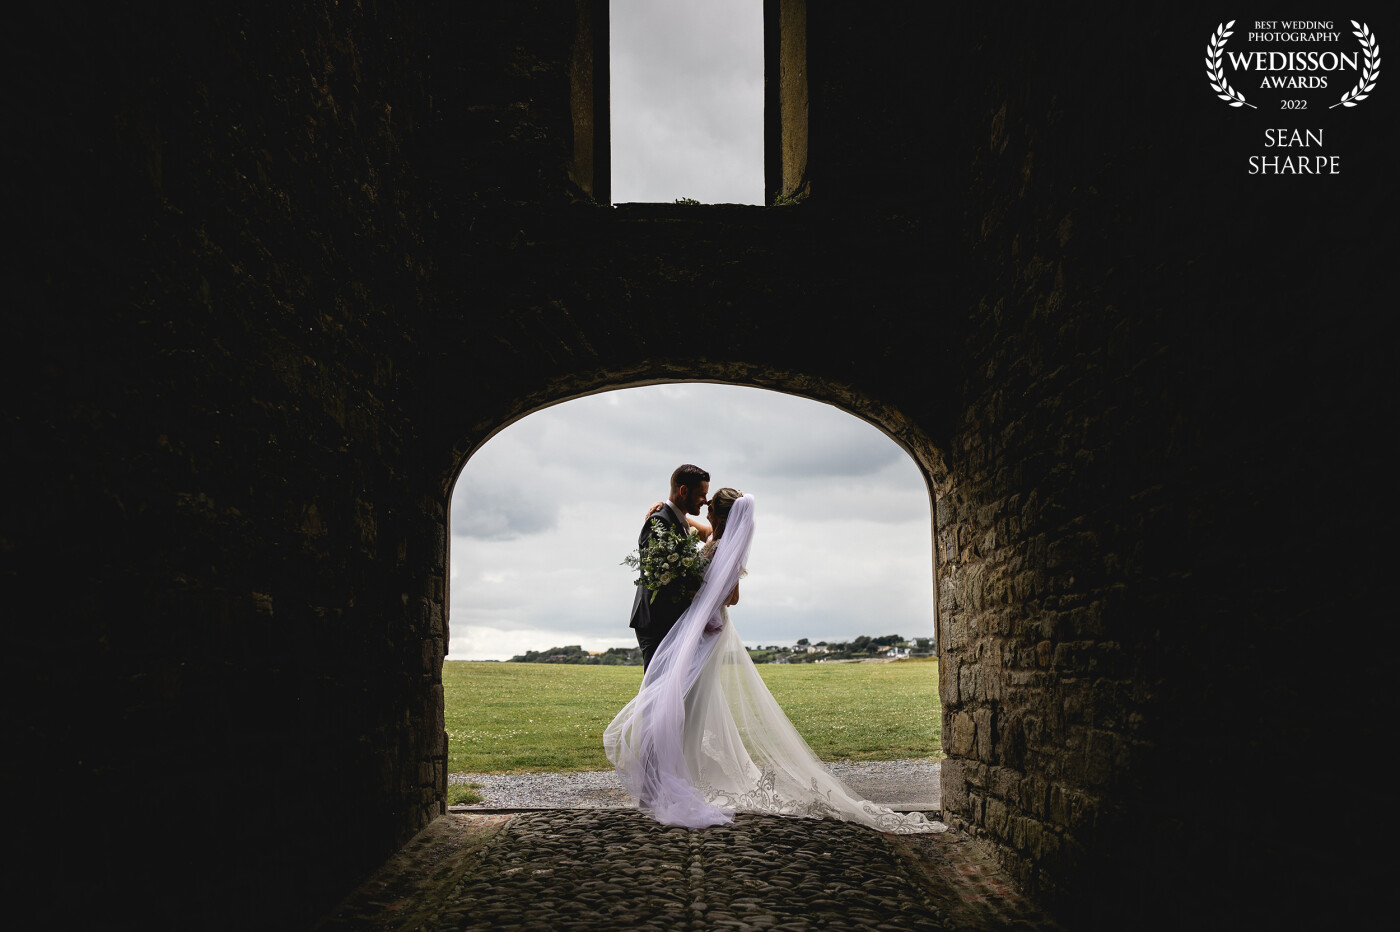 Sylvia and Mark at the beautiful Charles Fort, Kinsale. Always a joy shooting a wedding at this location with so many great little spots and features like this.